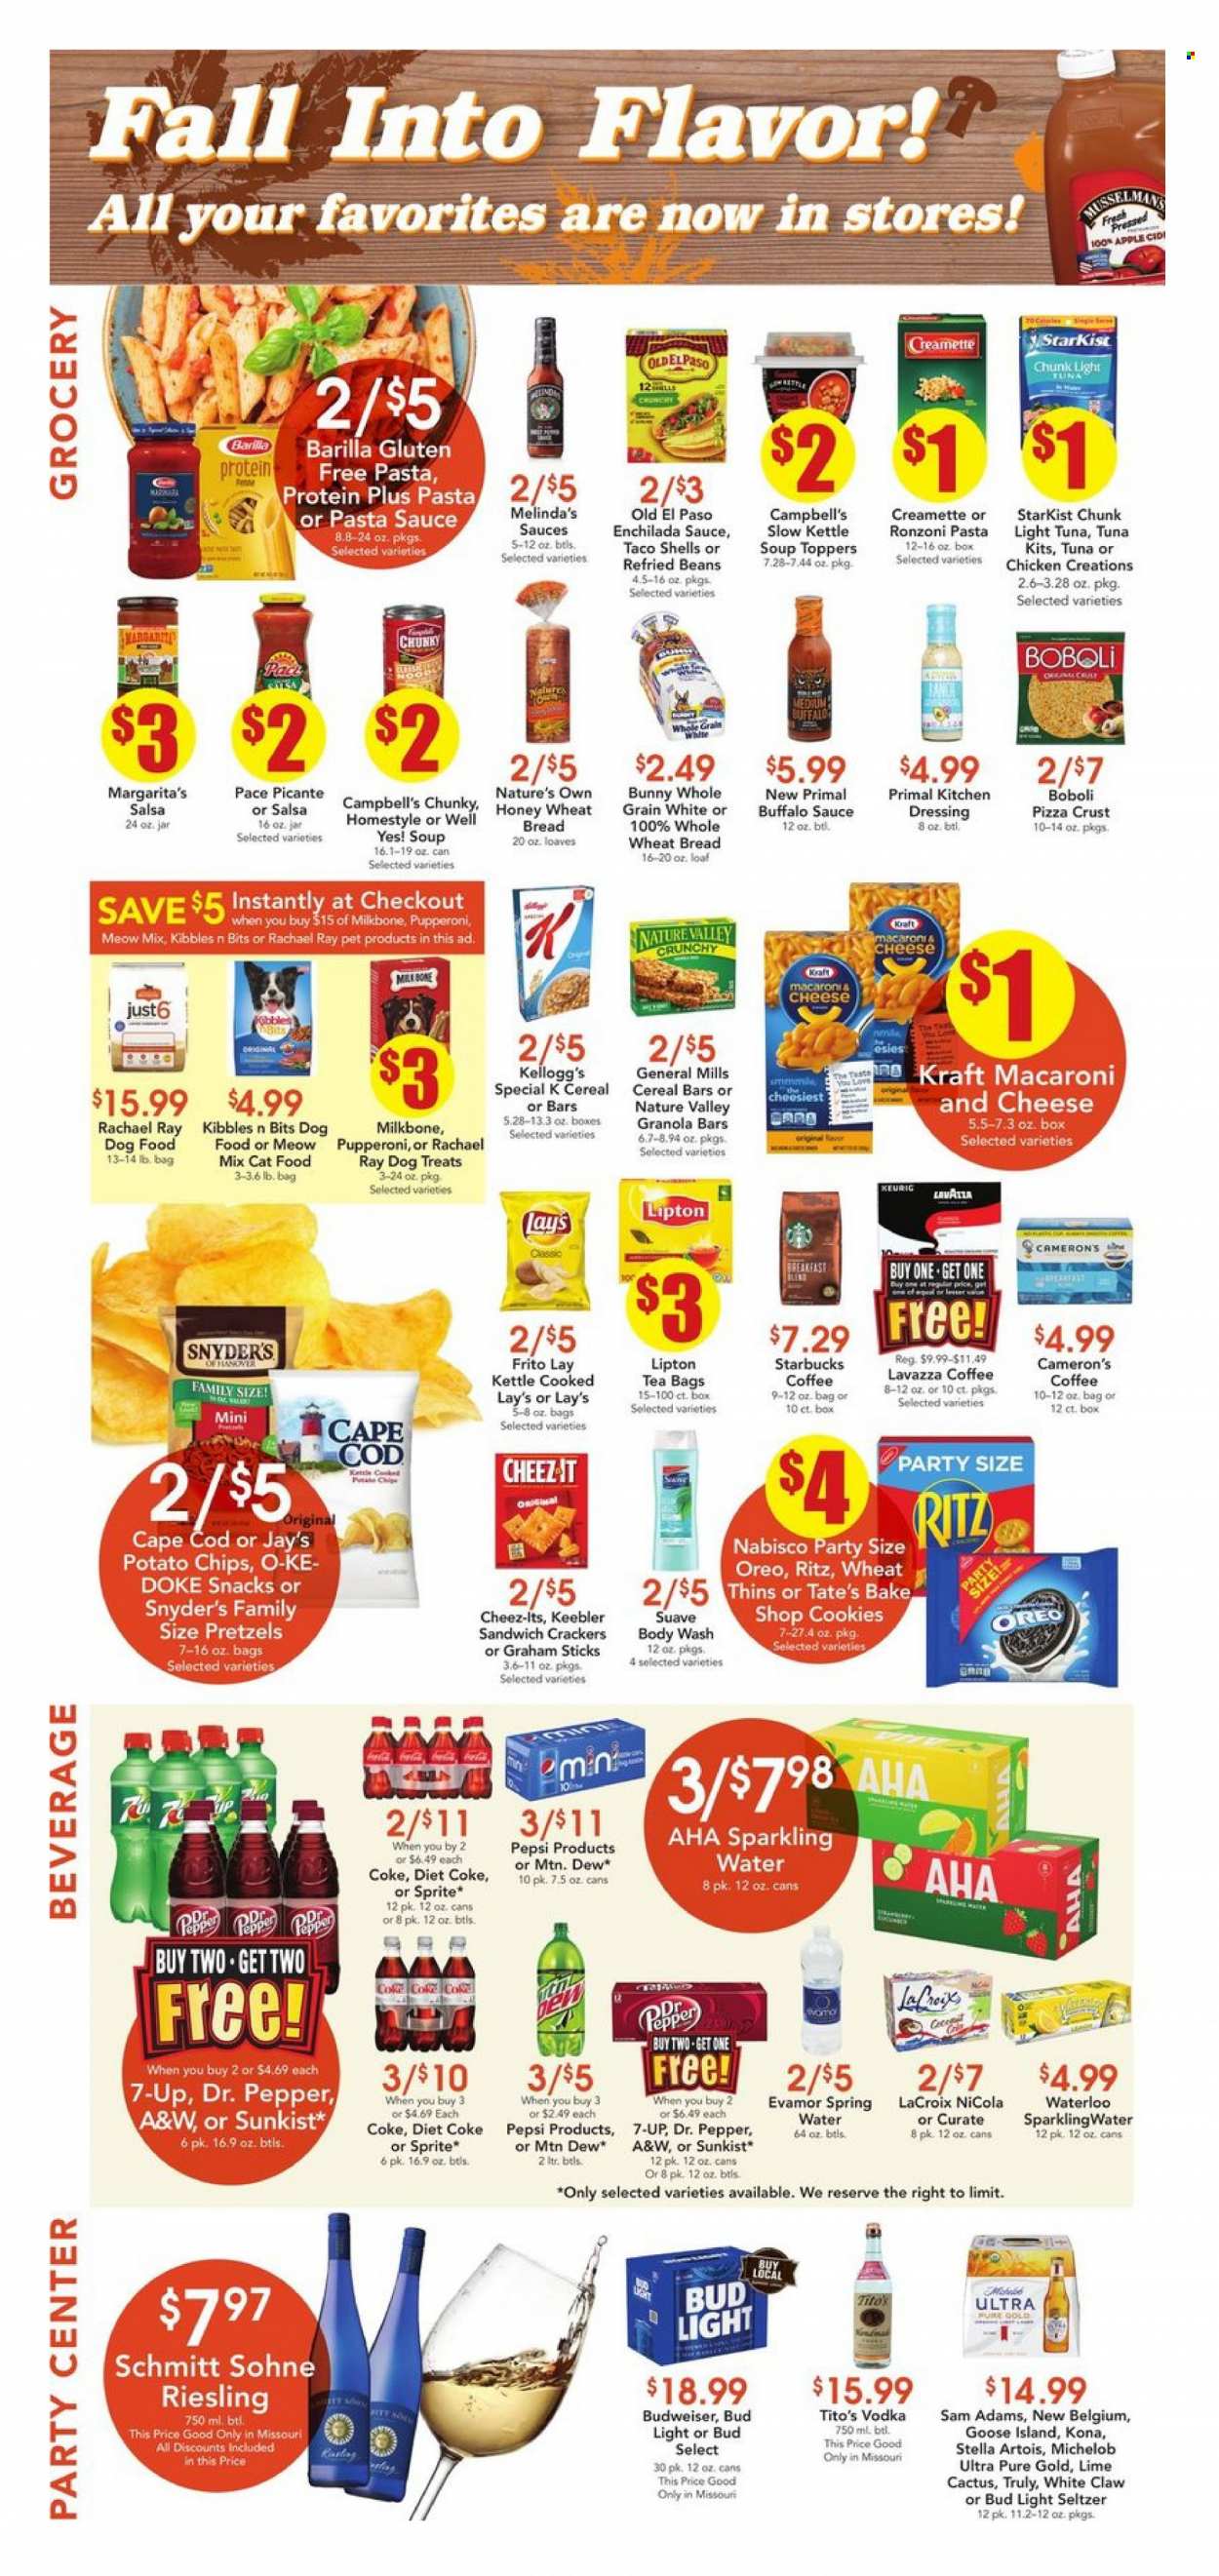 thumbnail - Dierbergs Flyer - 09/14/2021 - 09/20/2021 - Sales products - wheat bread, pretzels, Old El Paso, cod, StarKist, Campbell's, macaroni & cheese, pizza, pasta sauce, soup, Barilla, Kraft®, milk, cookies, snack, cereal bar, crackers, Kellogg's, Keebler, RITZ, potato chips, chips, Lay’s, Thins, enchilada sauce, refried beans, light tuna, cereals, granola bar, Nature Valley, Creamette, dressing, salsa, Coca-Cola, Mountain Dew, Sprite, Pepsi, Lipton, Dr. Pepper, Diet Coke, 7UP, A&W, spring water, tea bags, coffee, Starbucks, Keurig, Lavazza, Riesling, white wine, vodka, White Claw, Hard Seltzer, TRULY, beer, Bud Light, cactus, Nature's Own, Budweiser, Stella Artois, Michelob. Page 3.